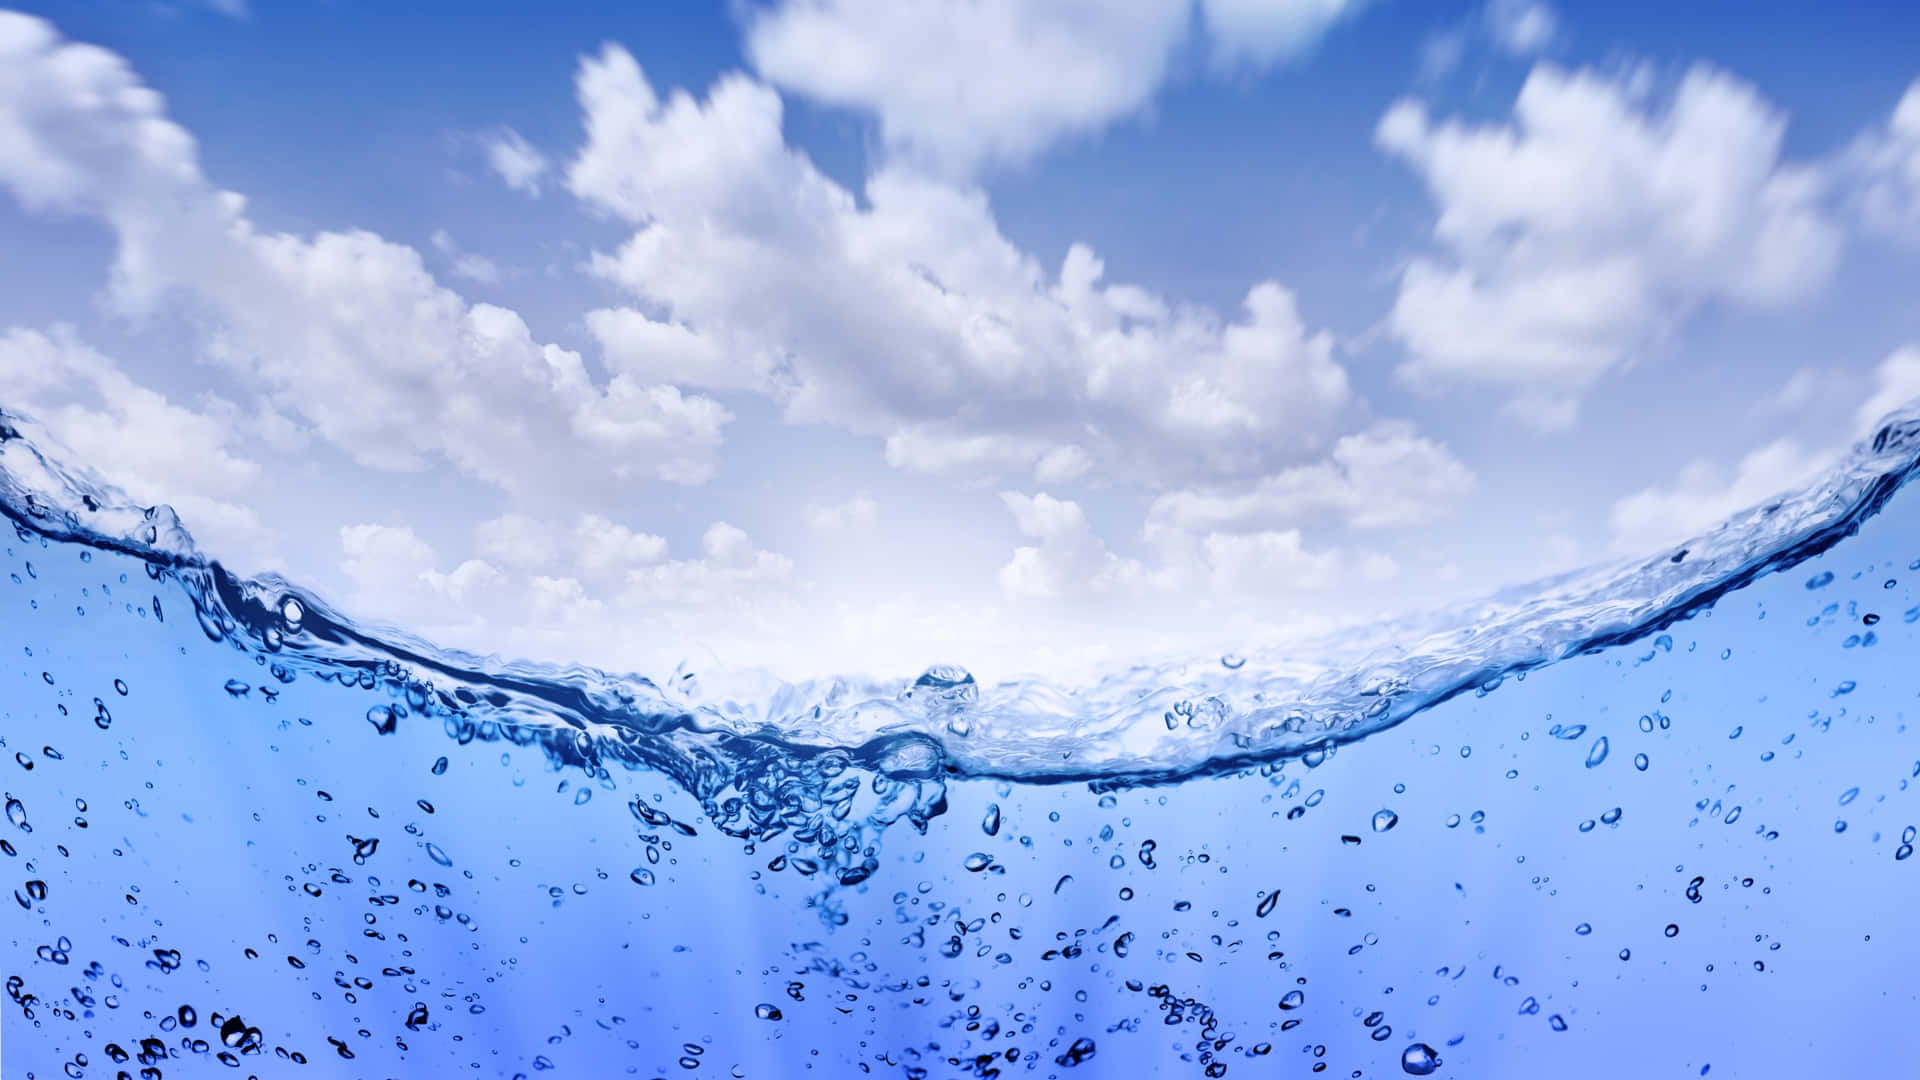 Underwater Viewwith Skyand Clouds Wallpaper